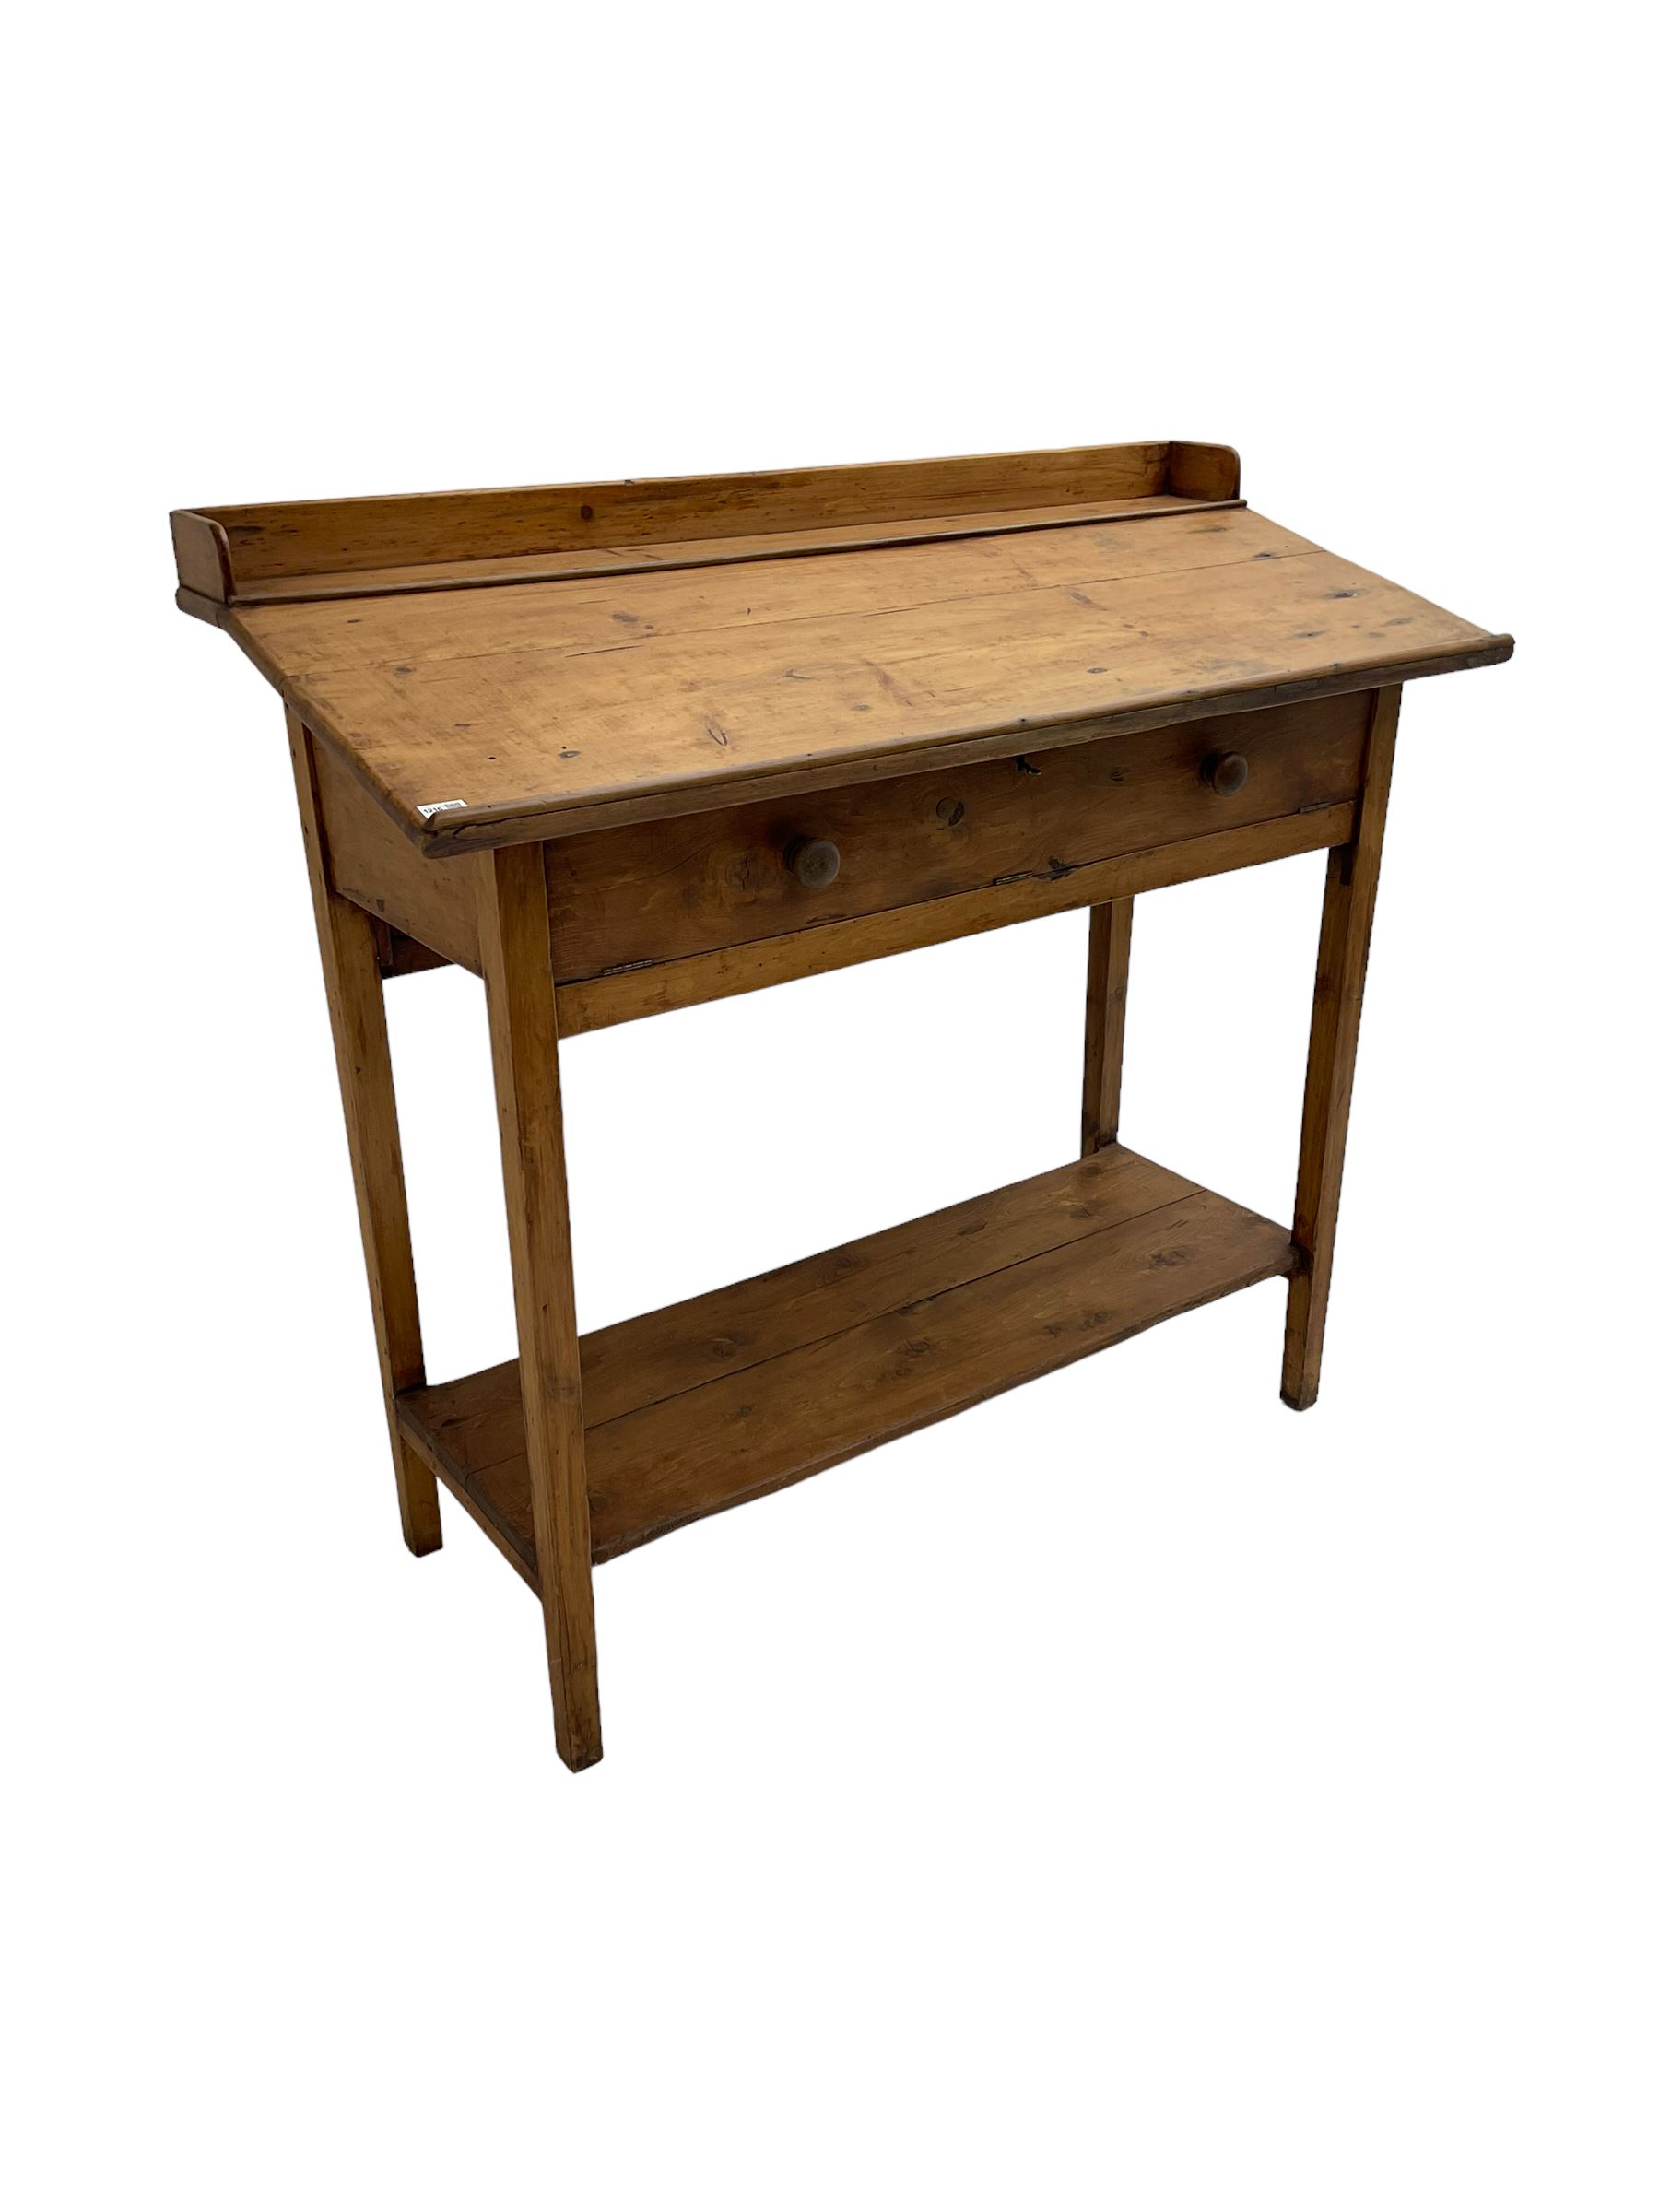 Stained pine clerks desk or table - Image 6 of 6